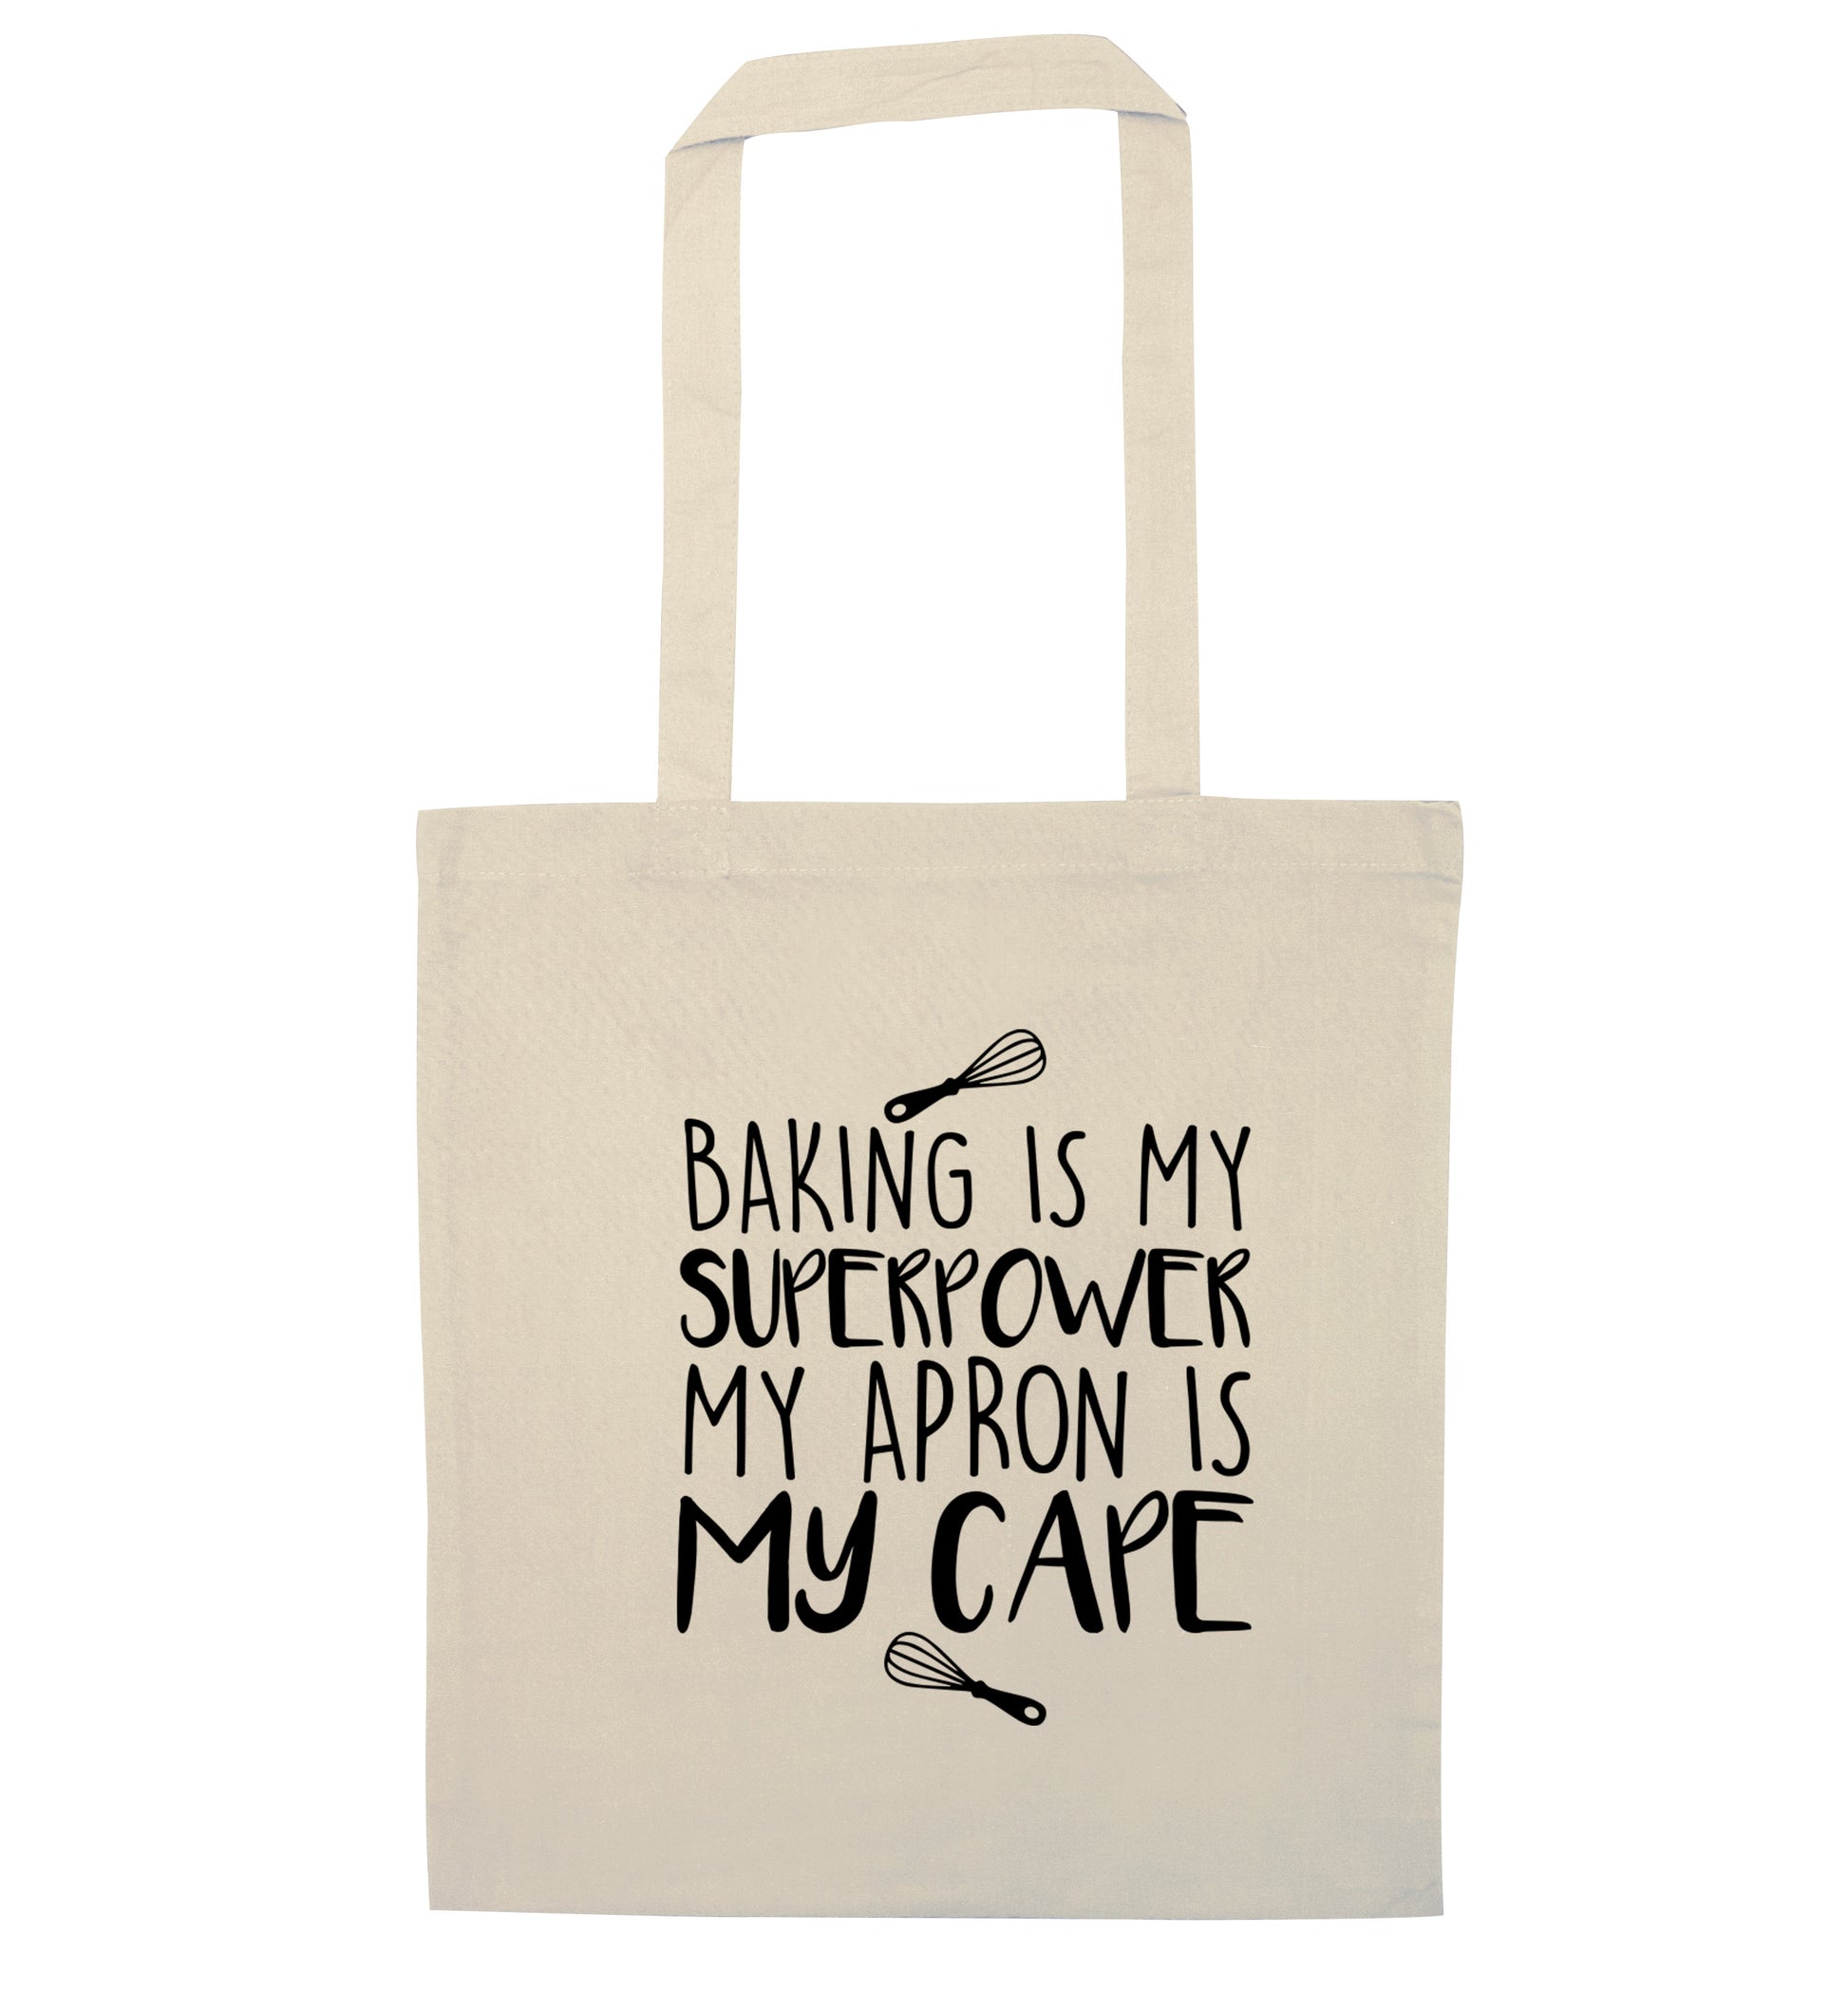 Baking is my superpower my apron is my cape natural tote bag